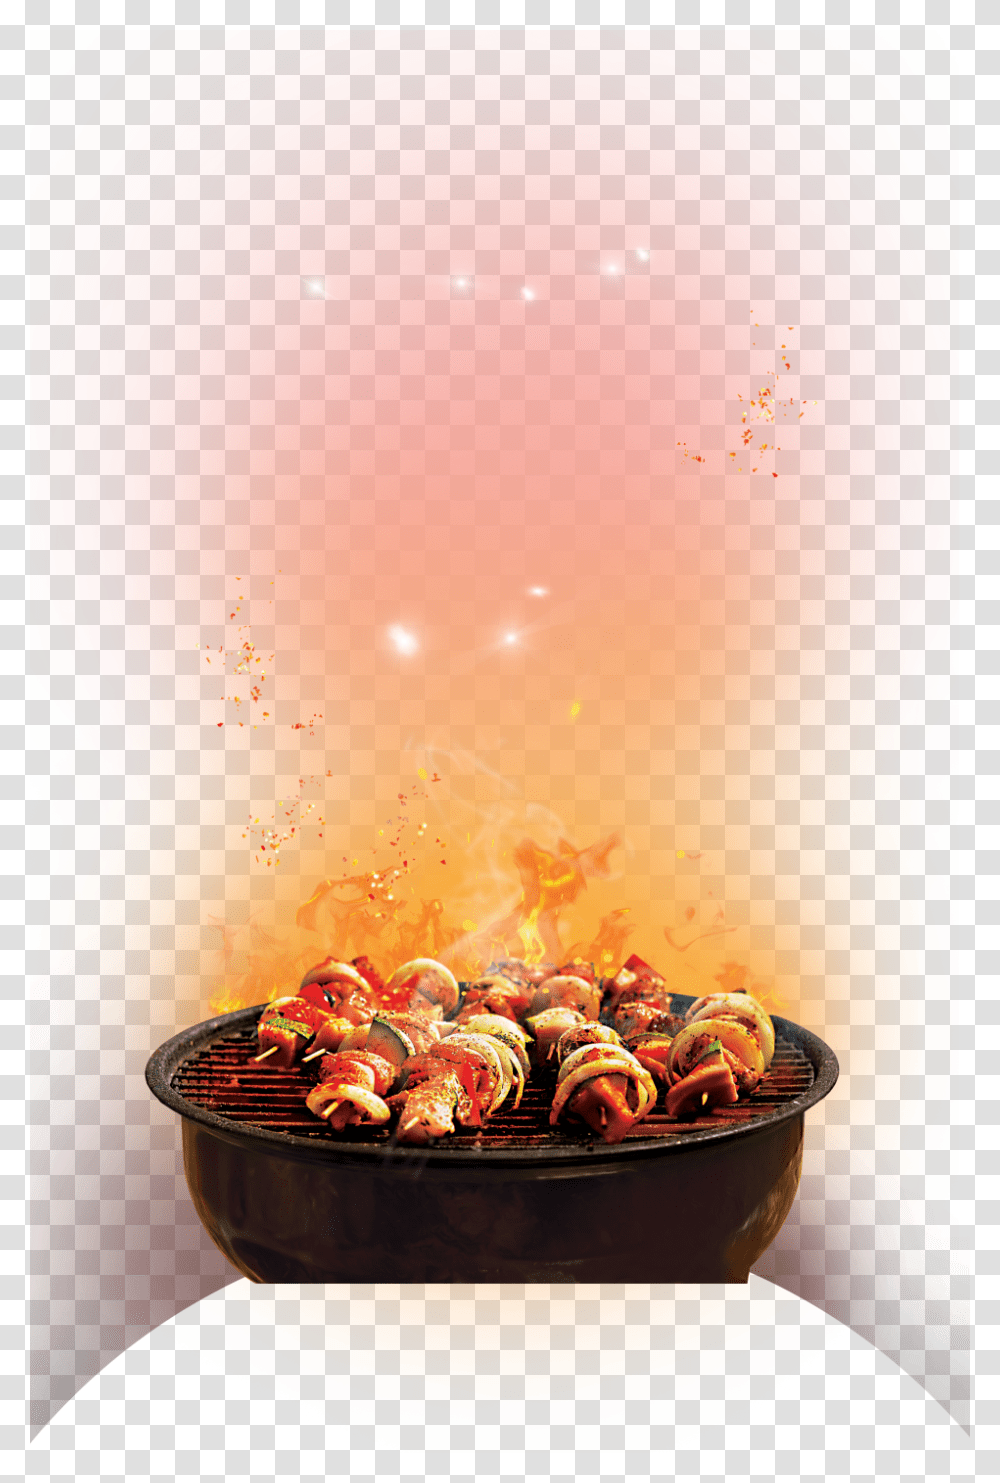 Barbecue Cook On Grill Image Grill, Food, Sweets, Confectionery, Candy Transparent Png